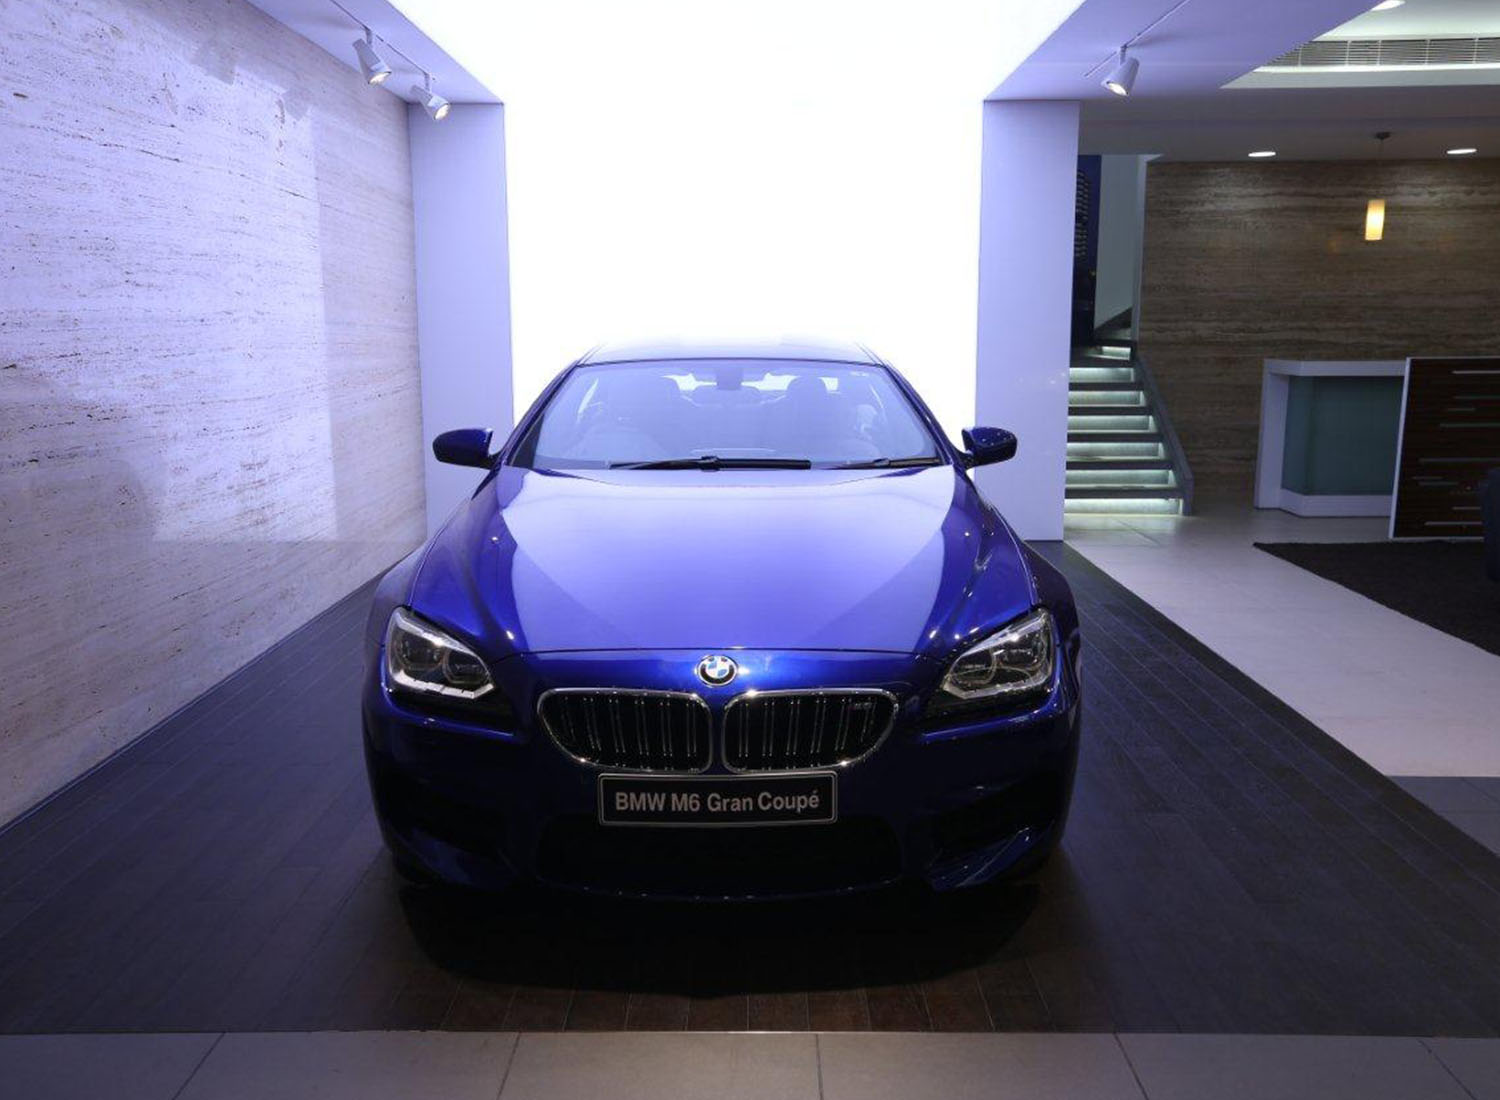 BMW - Stretch Ceiling  Translucent with Backlighting in Showroom - Showroom